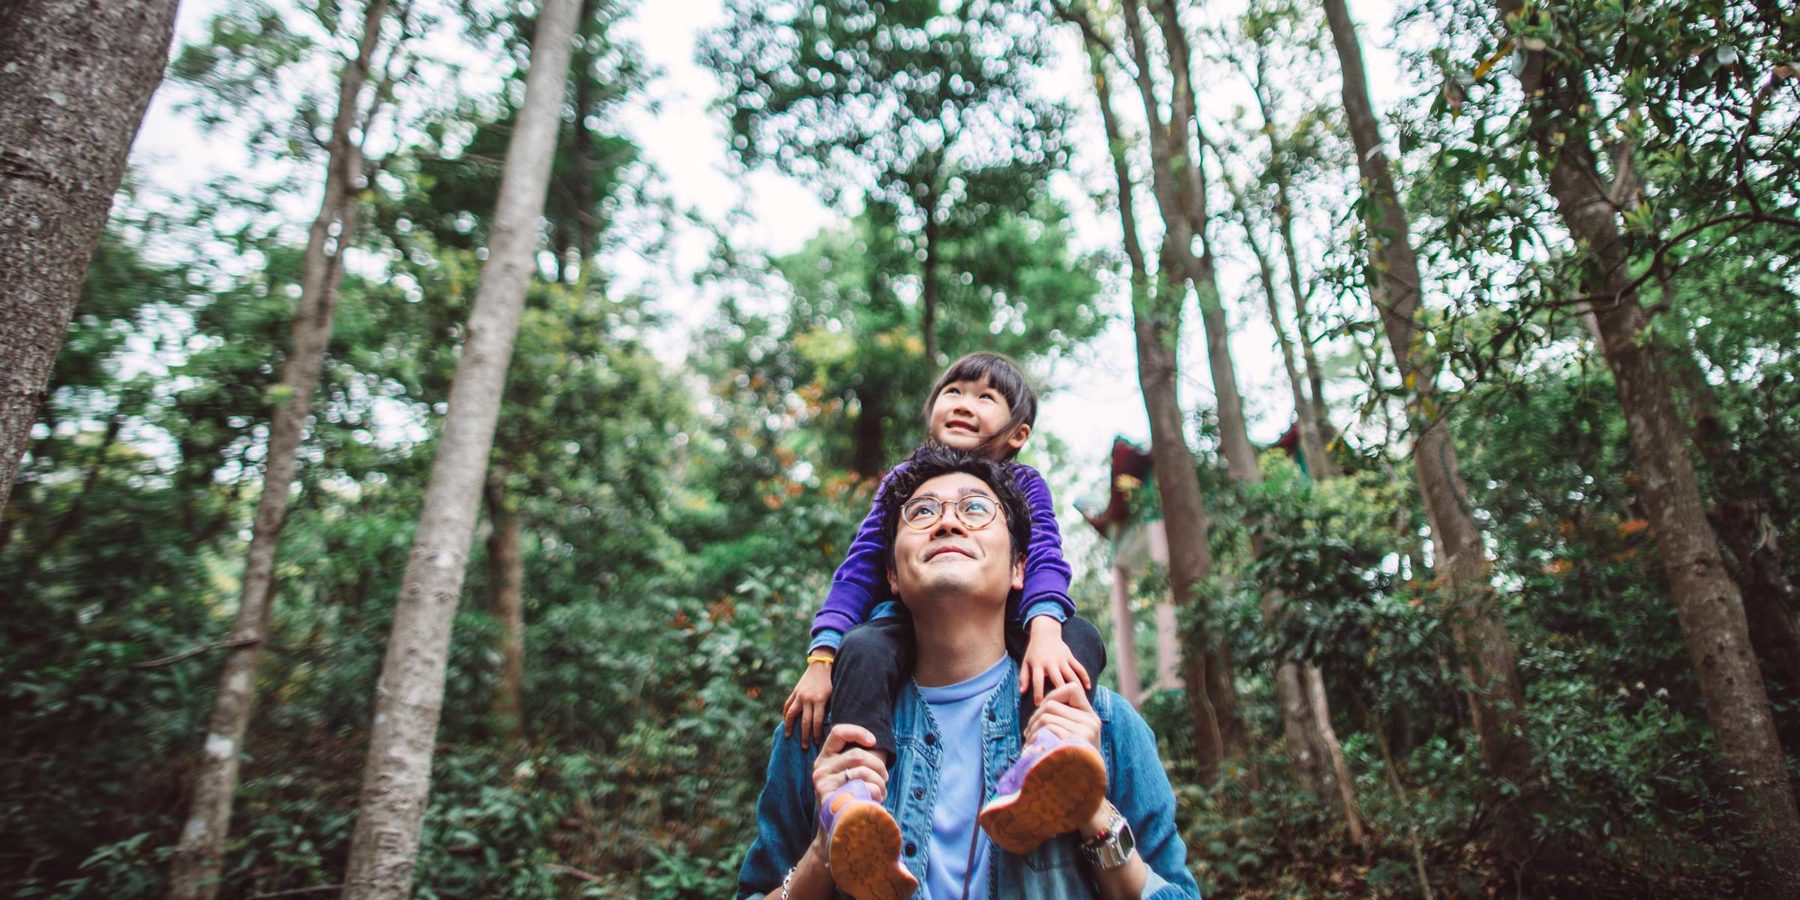 Lovely little girl riding joyfully on her young daddy?s shoulder while they are hiking in forest. Both of them looking up at the tall trees & appreciating the scenic green landscape that surrounds them.